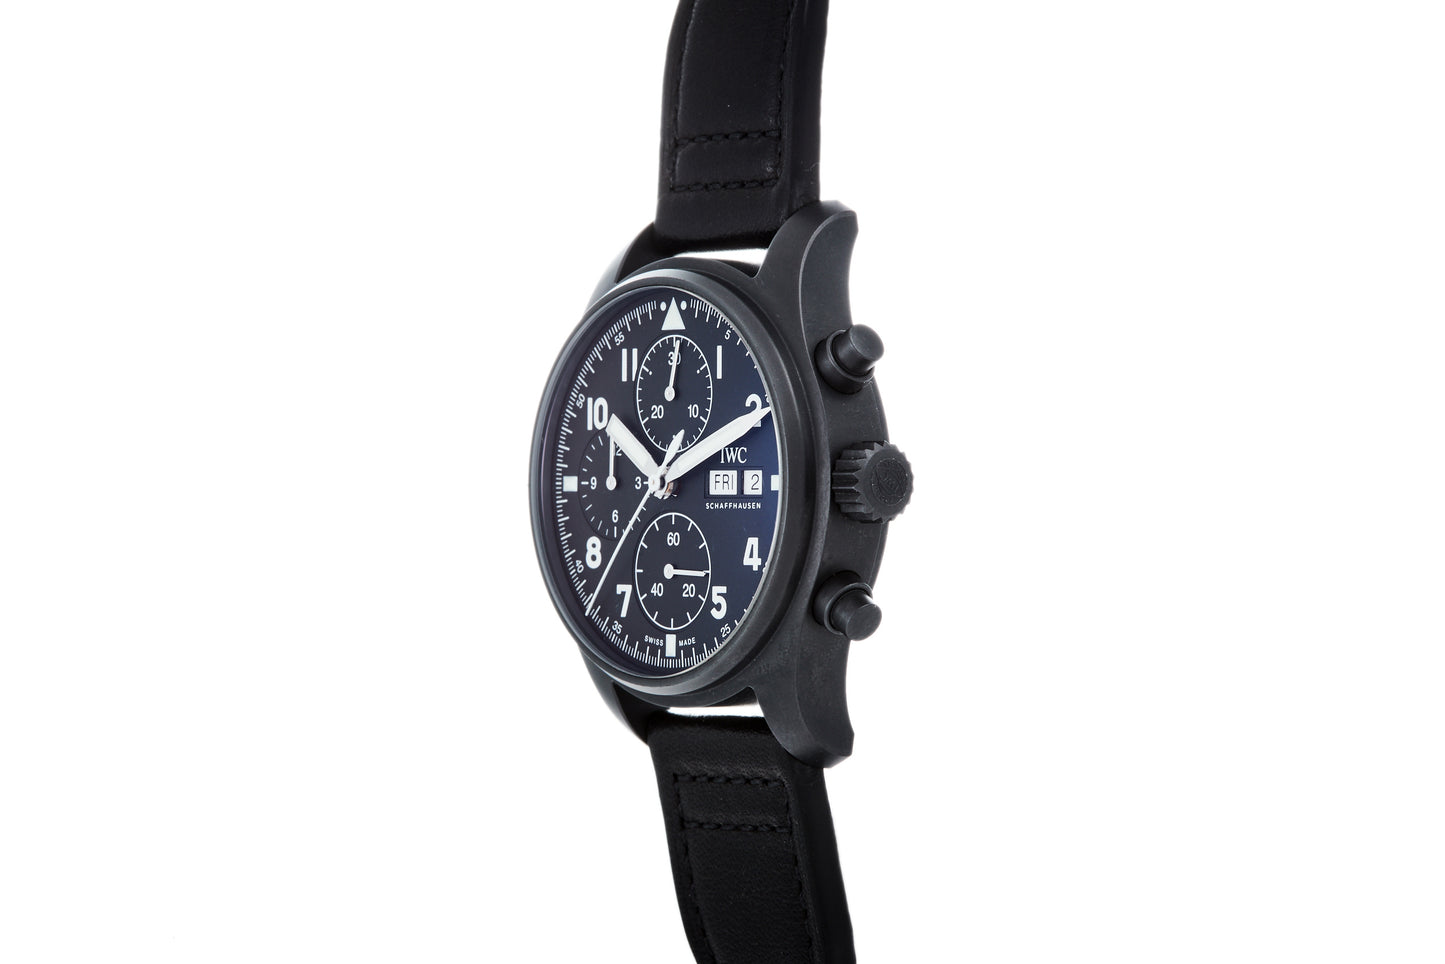 IWC Pilot's Watch Chronograph 'Tribute To 3705'